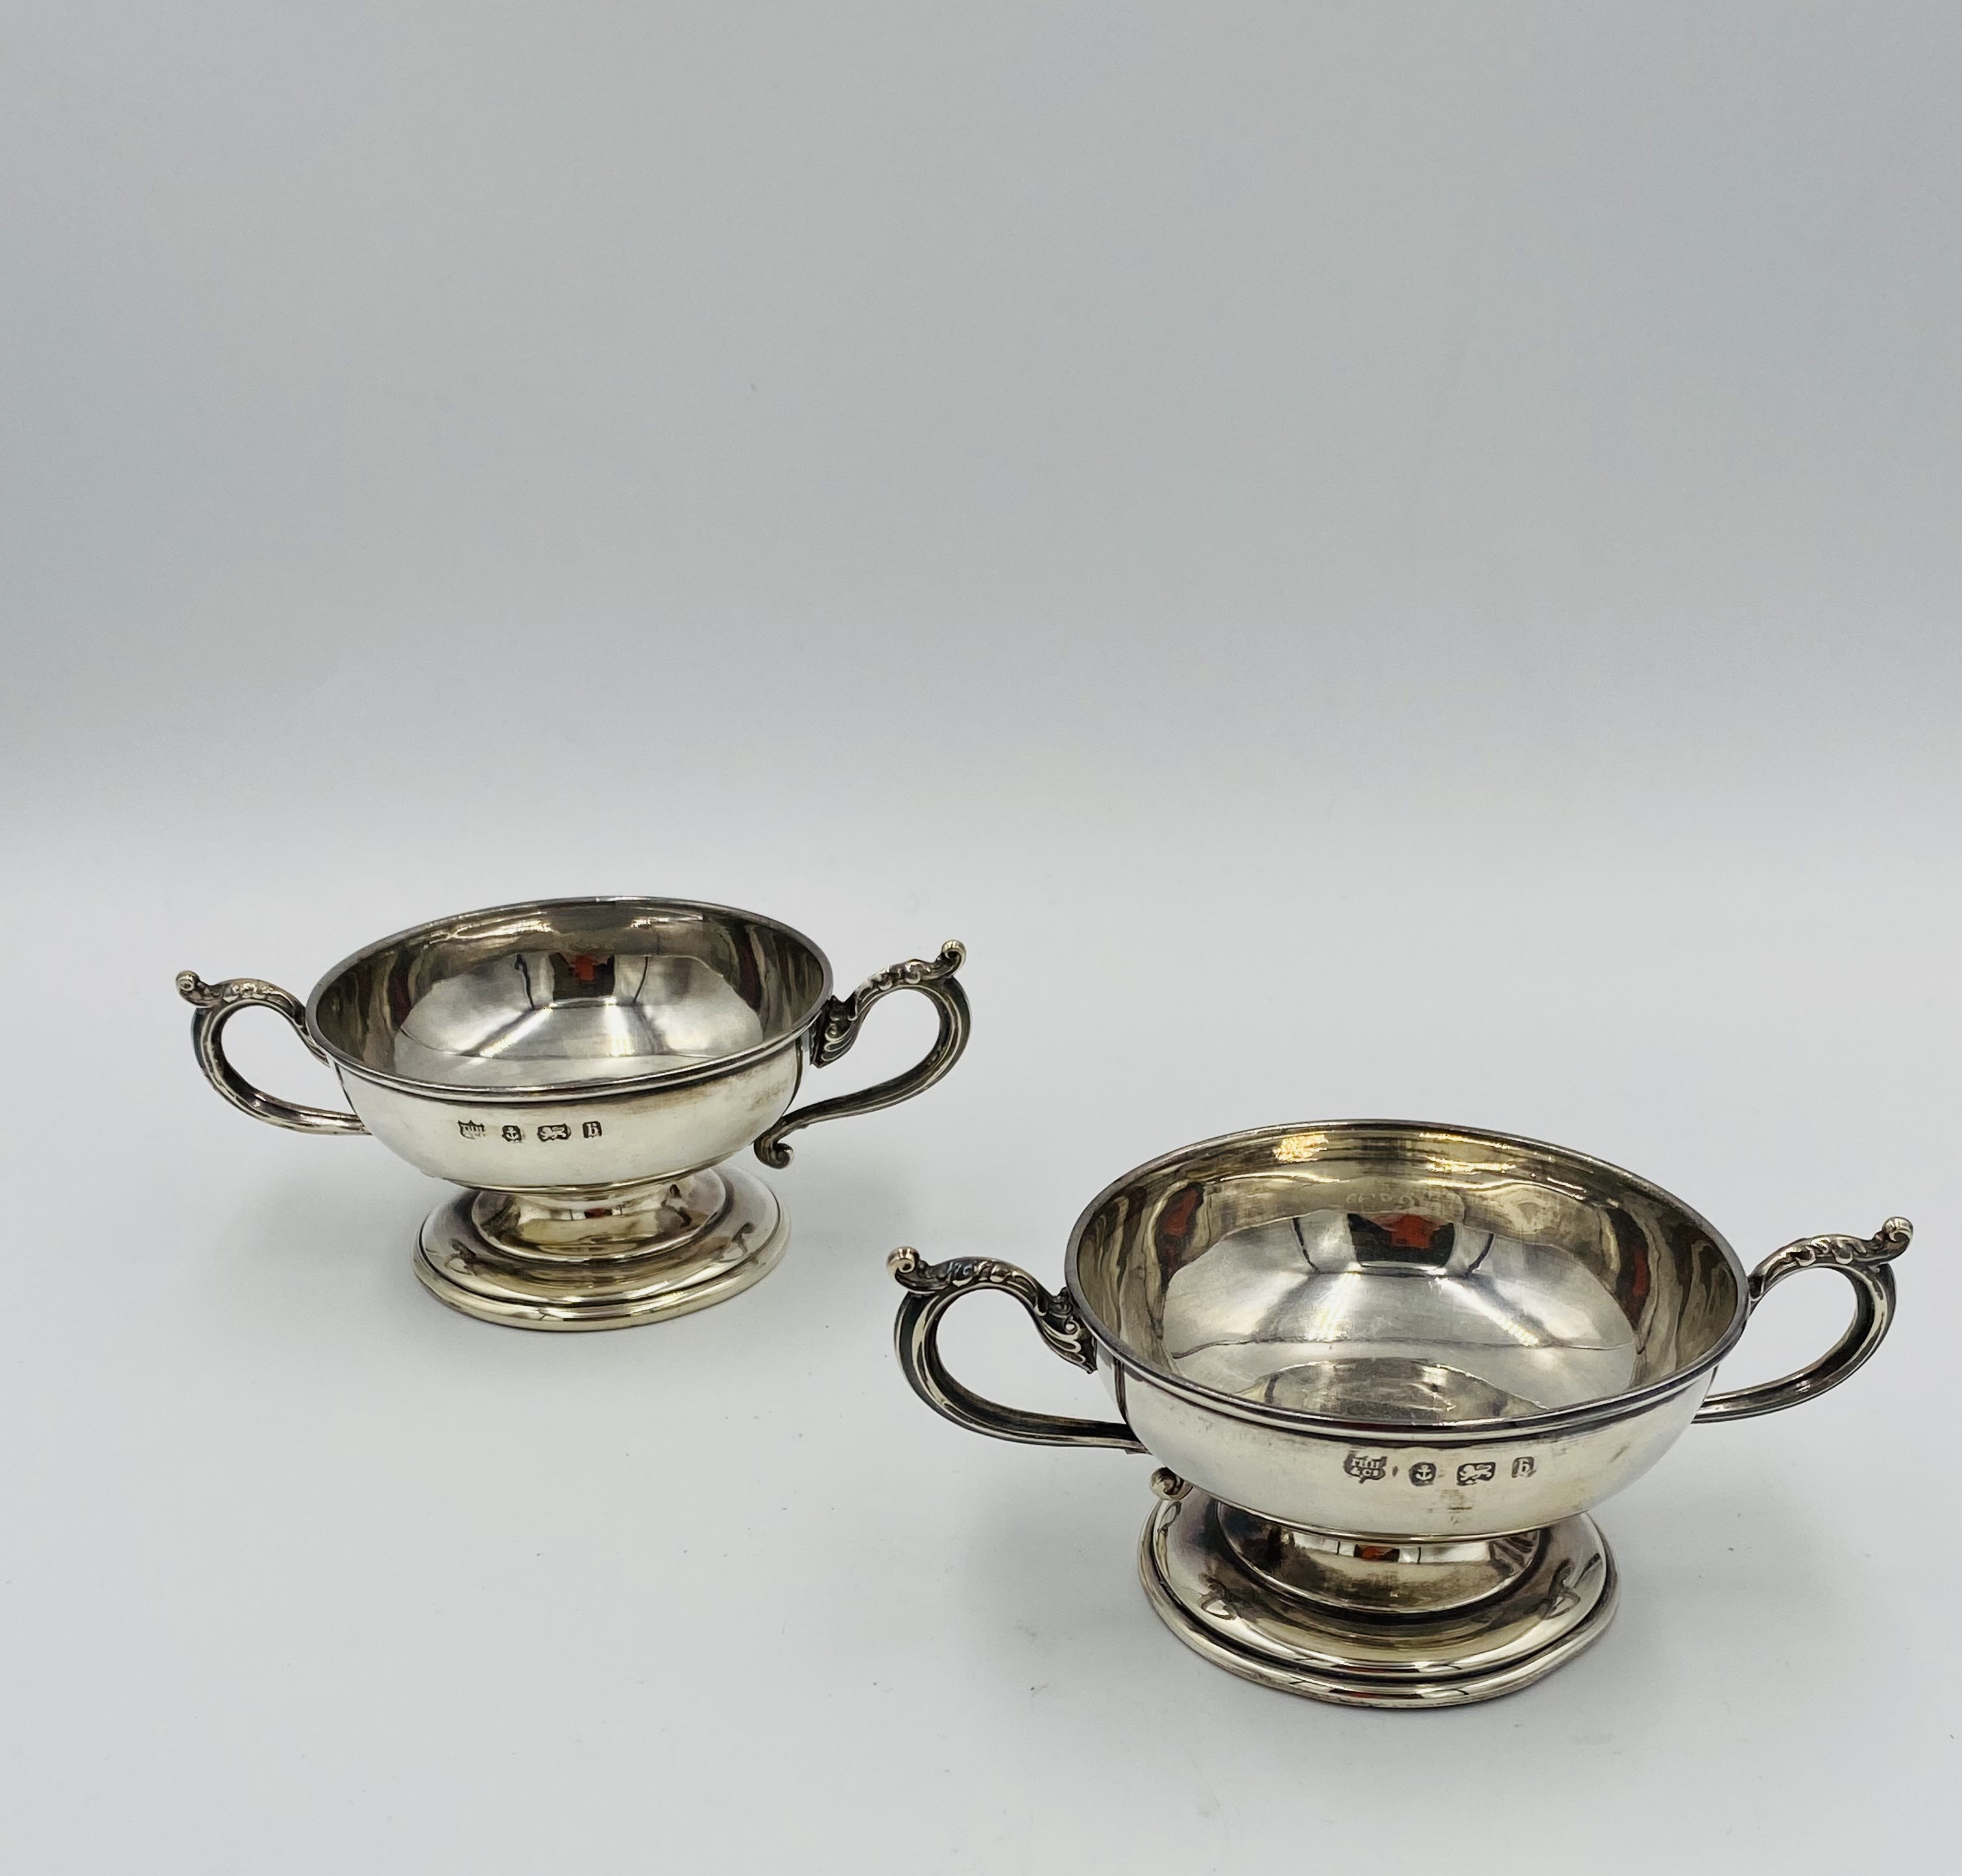 Pair of twin handled low cups